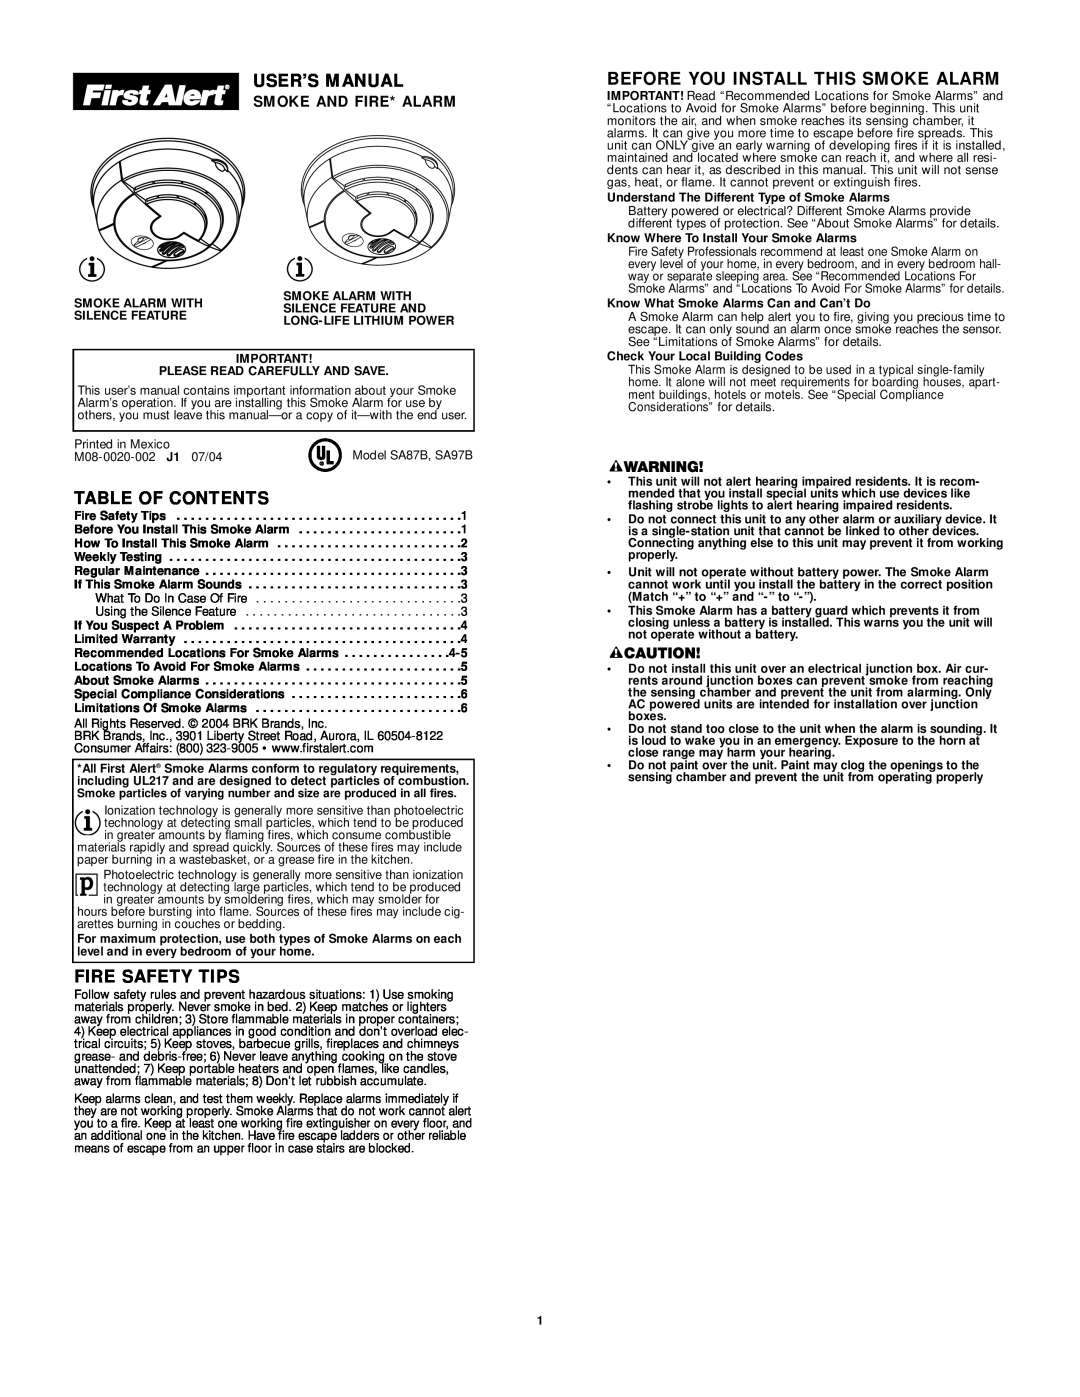 First Alert SA87CN user manual User’S Manual, Table Of Contents, Fire Safety Tips, Before You Install This Smoke Alarm 